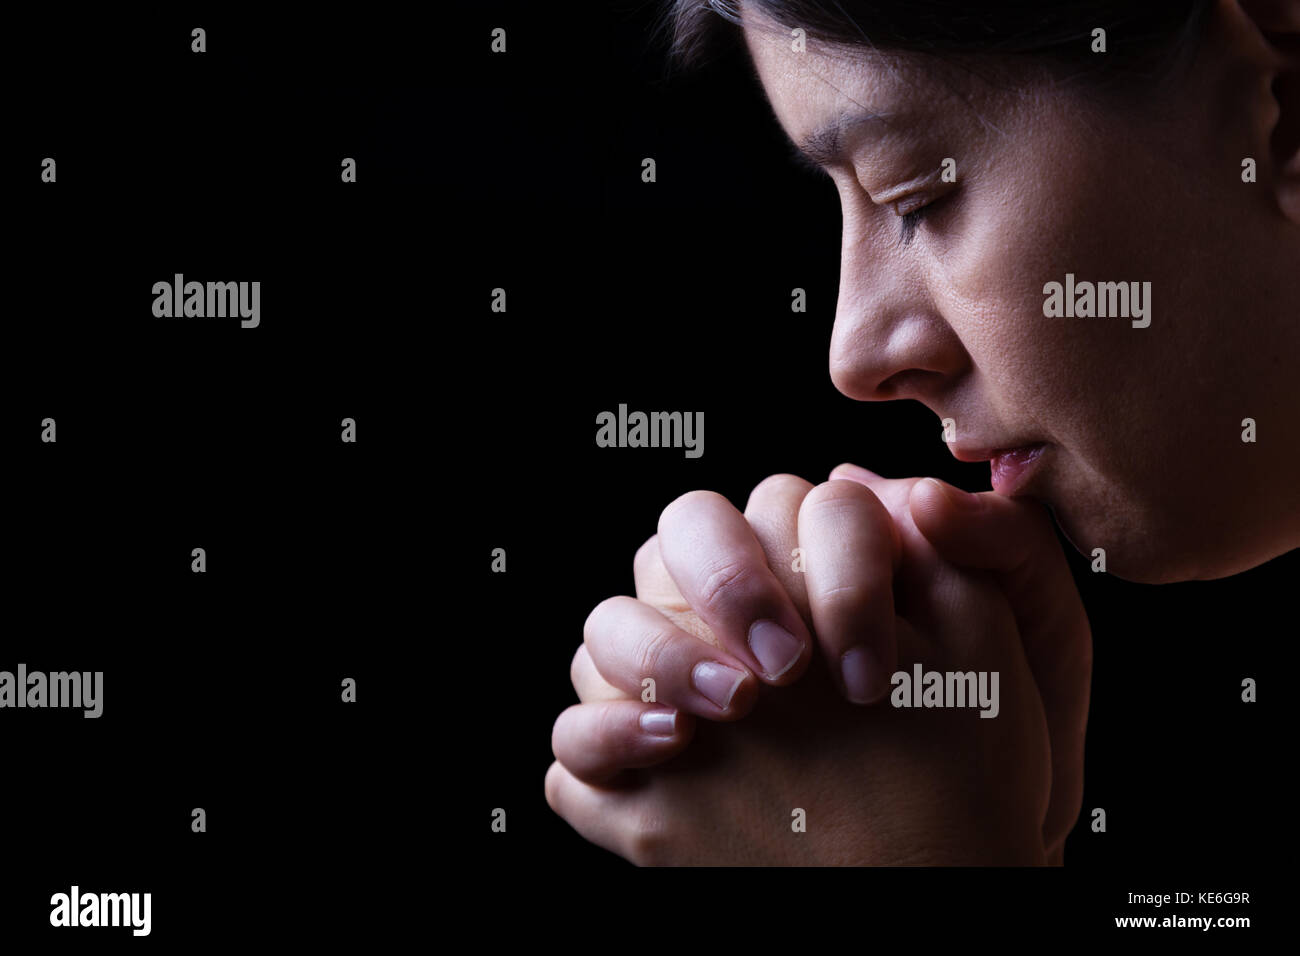 Faithful woman praying, hands folded in worship to god with head down and eyes closed in religious fervor, on a black background / prayer portrait Stock Photo